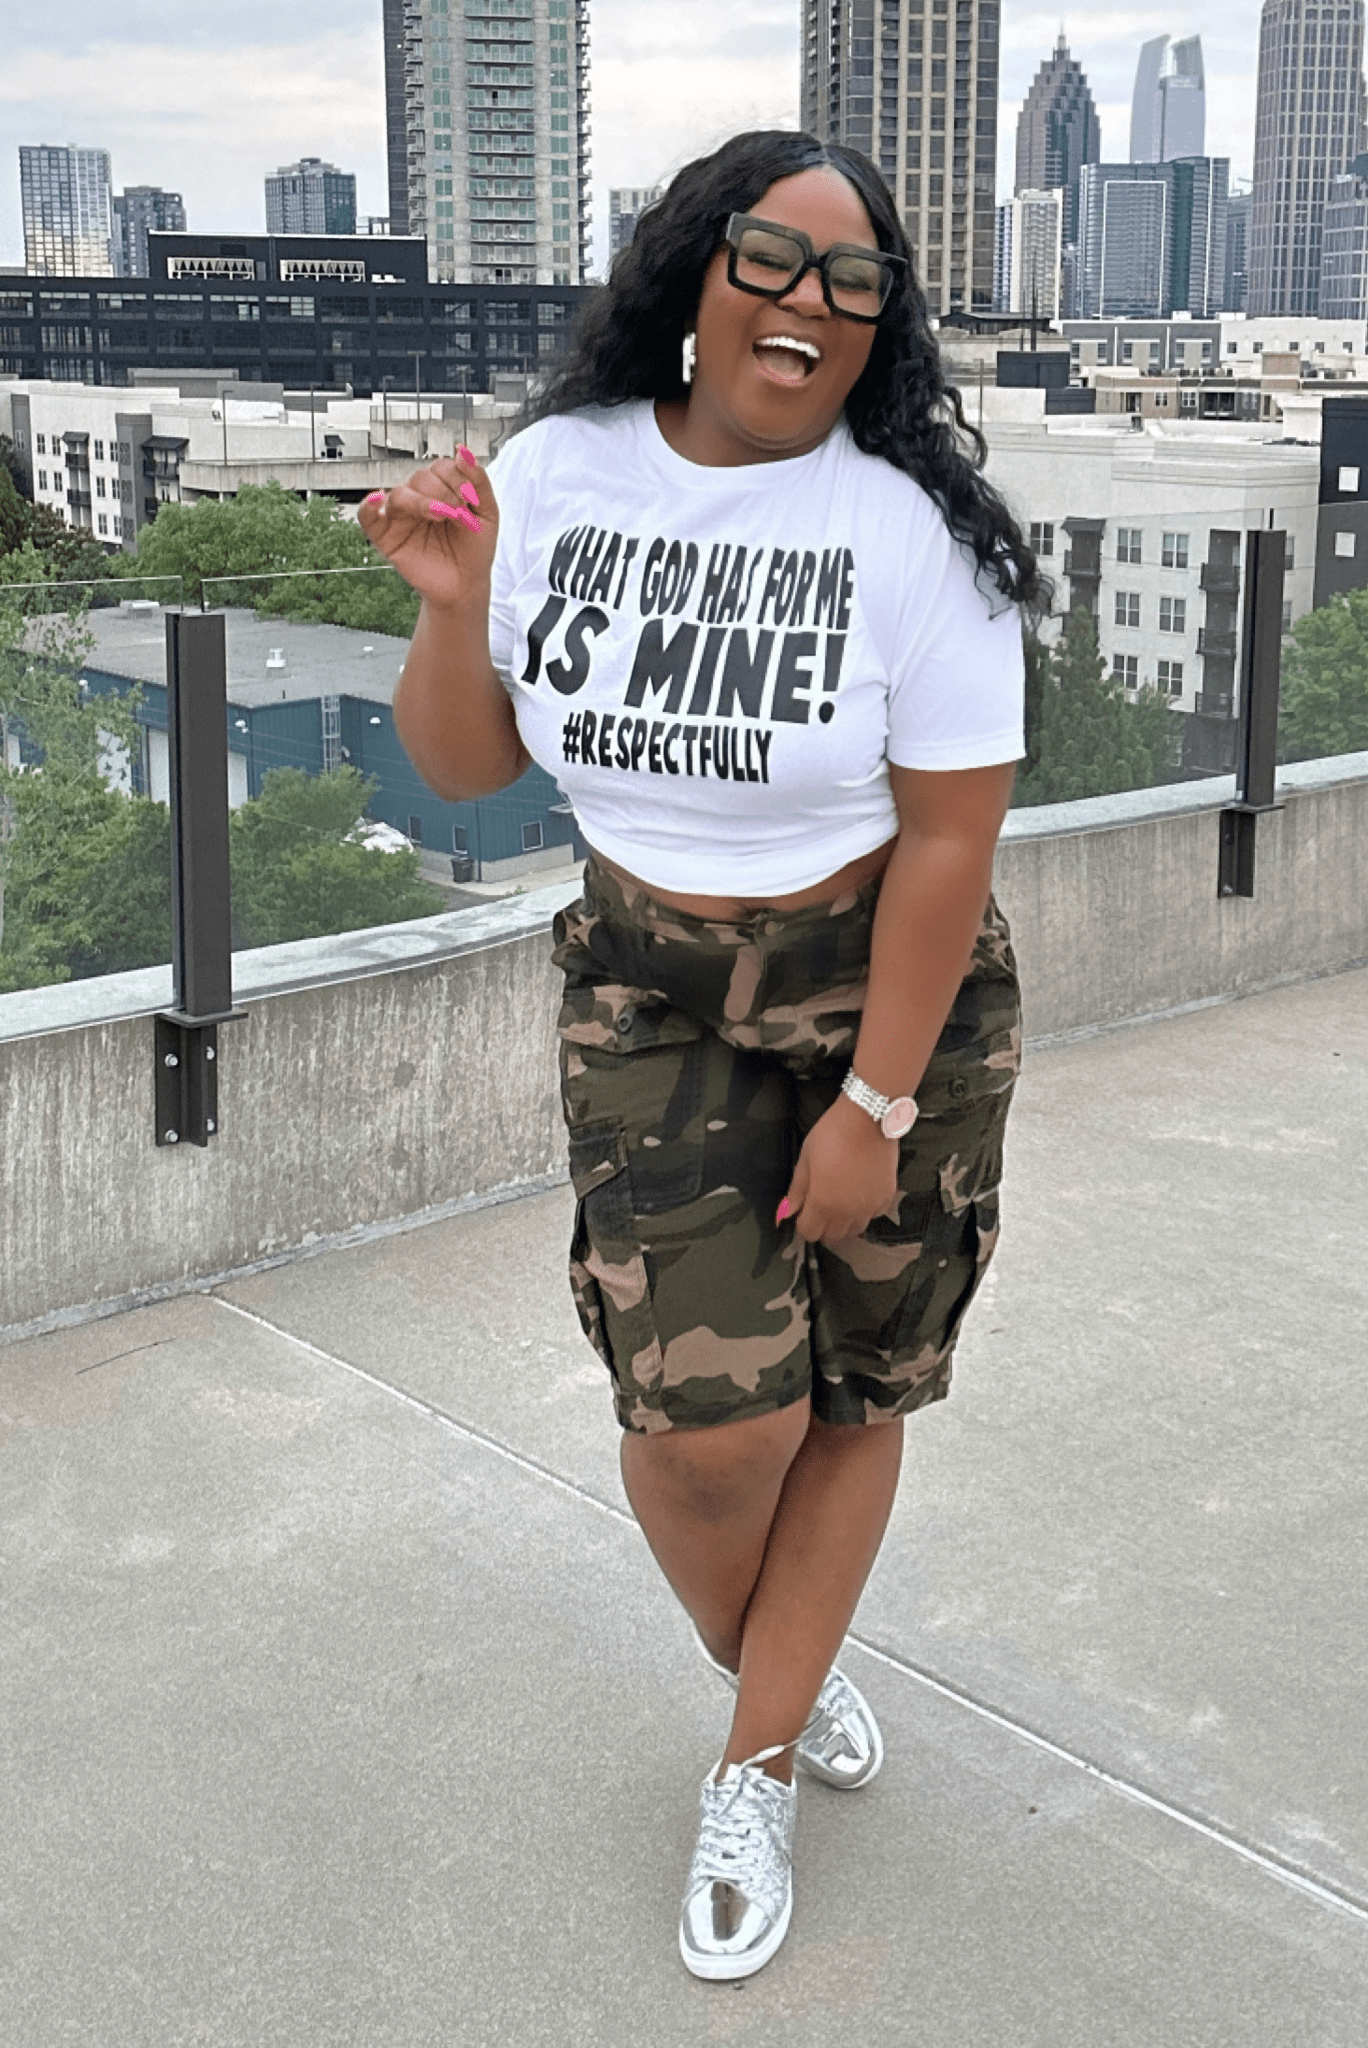 What God has for me tee - Z’Nor Avenue Boutique